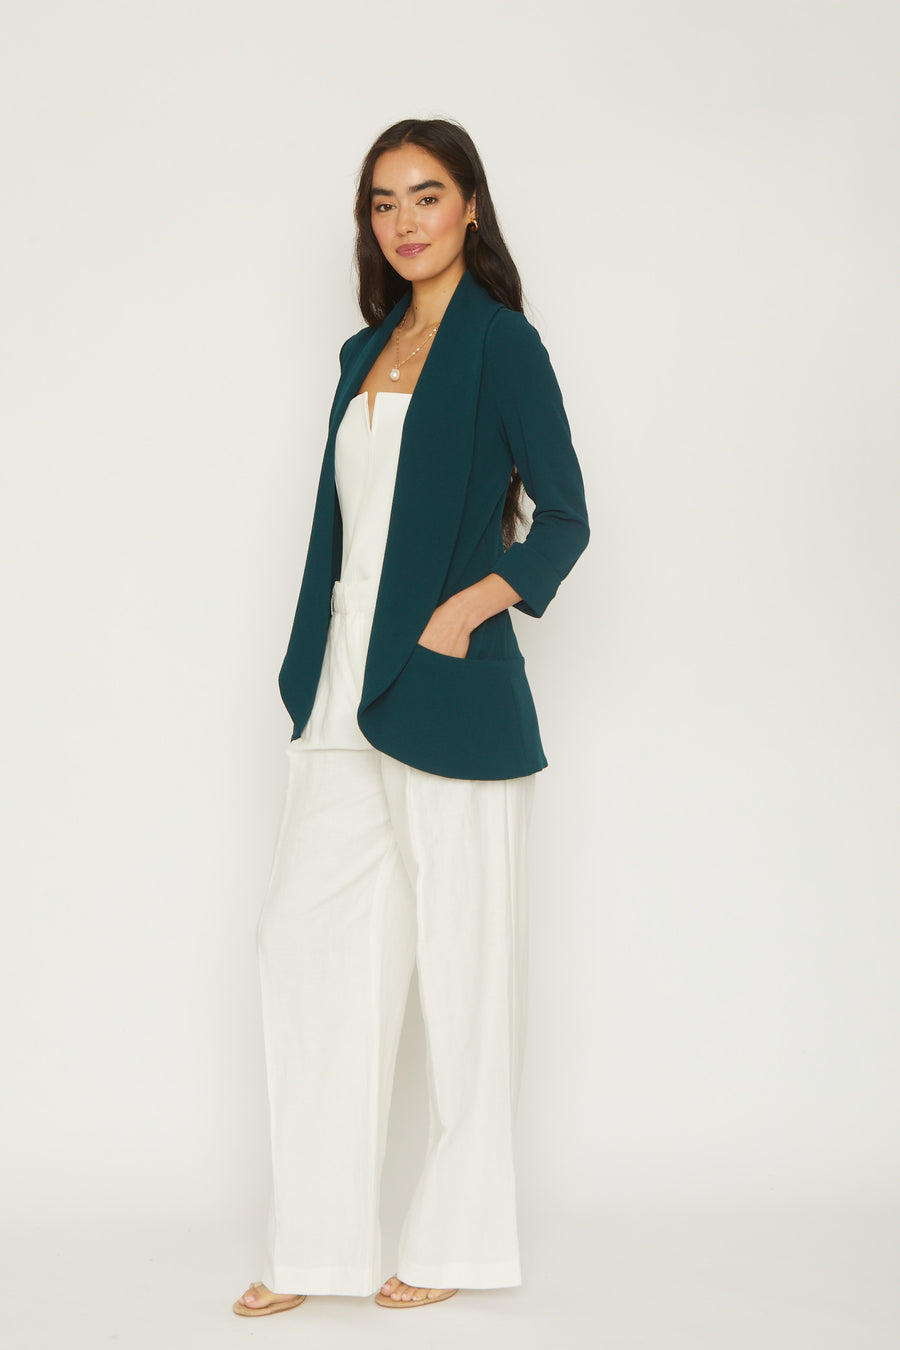 No Srcipt image - Images of 2 of 11 Melanie knit jacket, knit crepe fabric, 3/4 sleeve length, open front , shawl collar, front pocket, soft and stretch, teal color